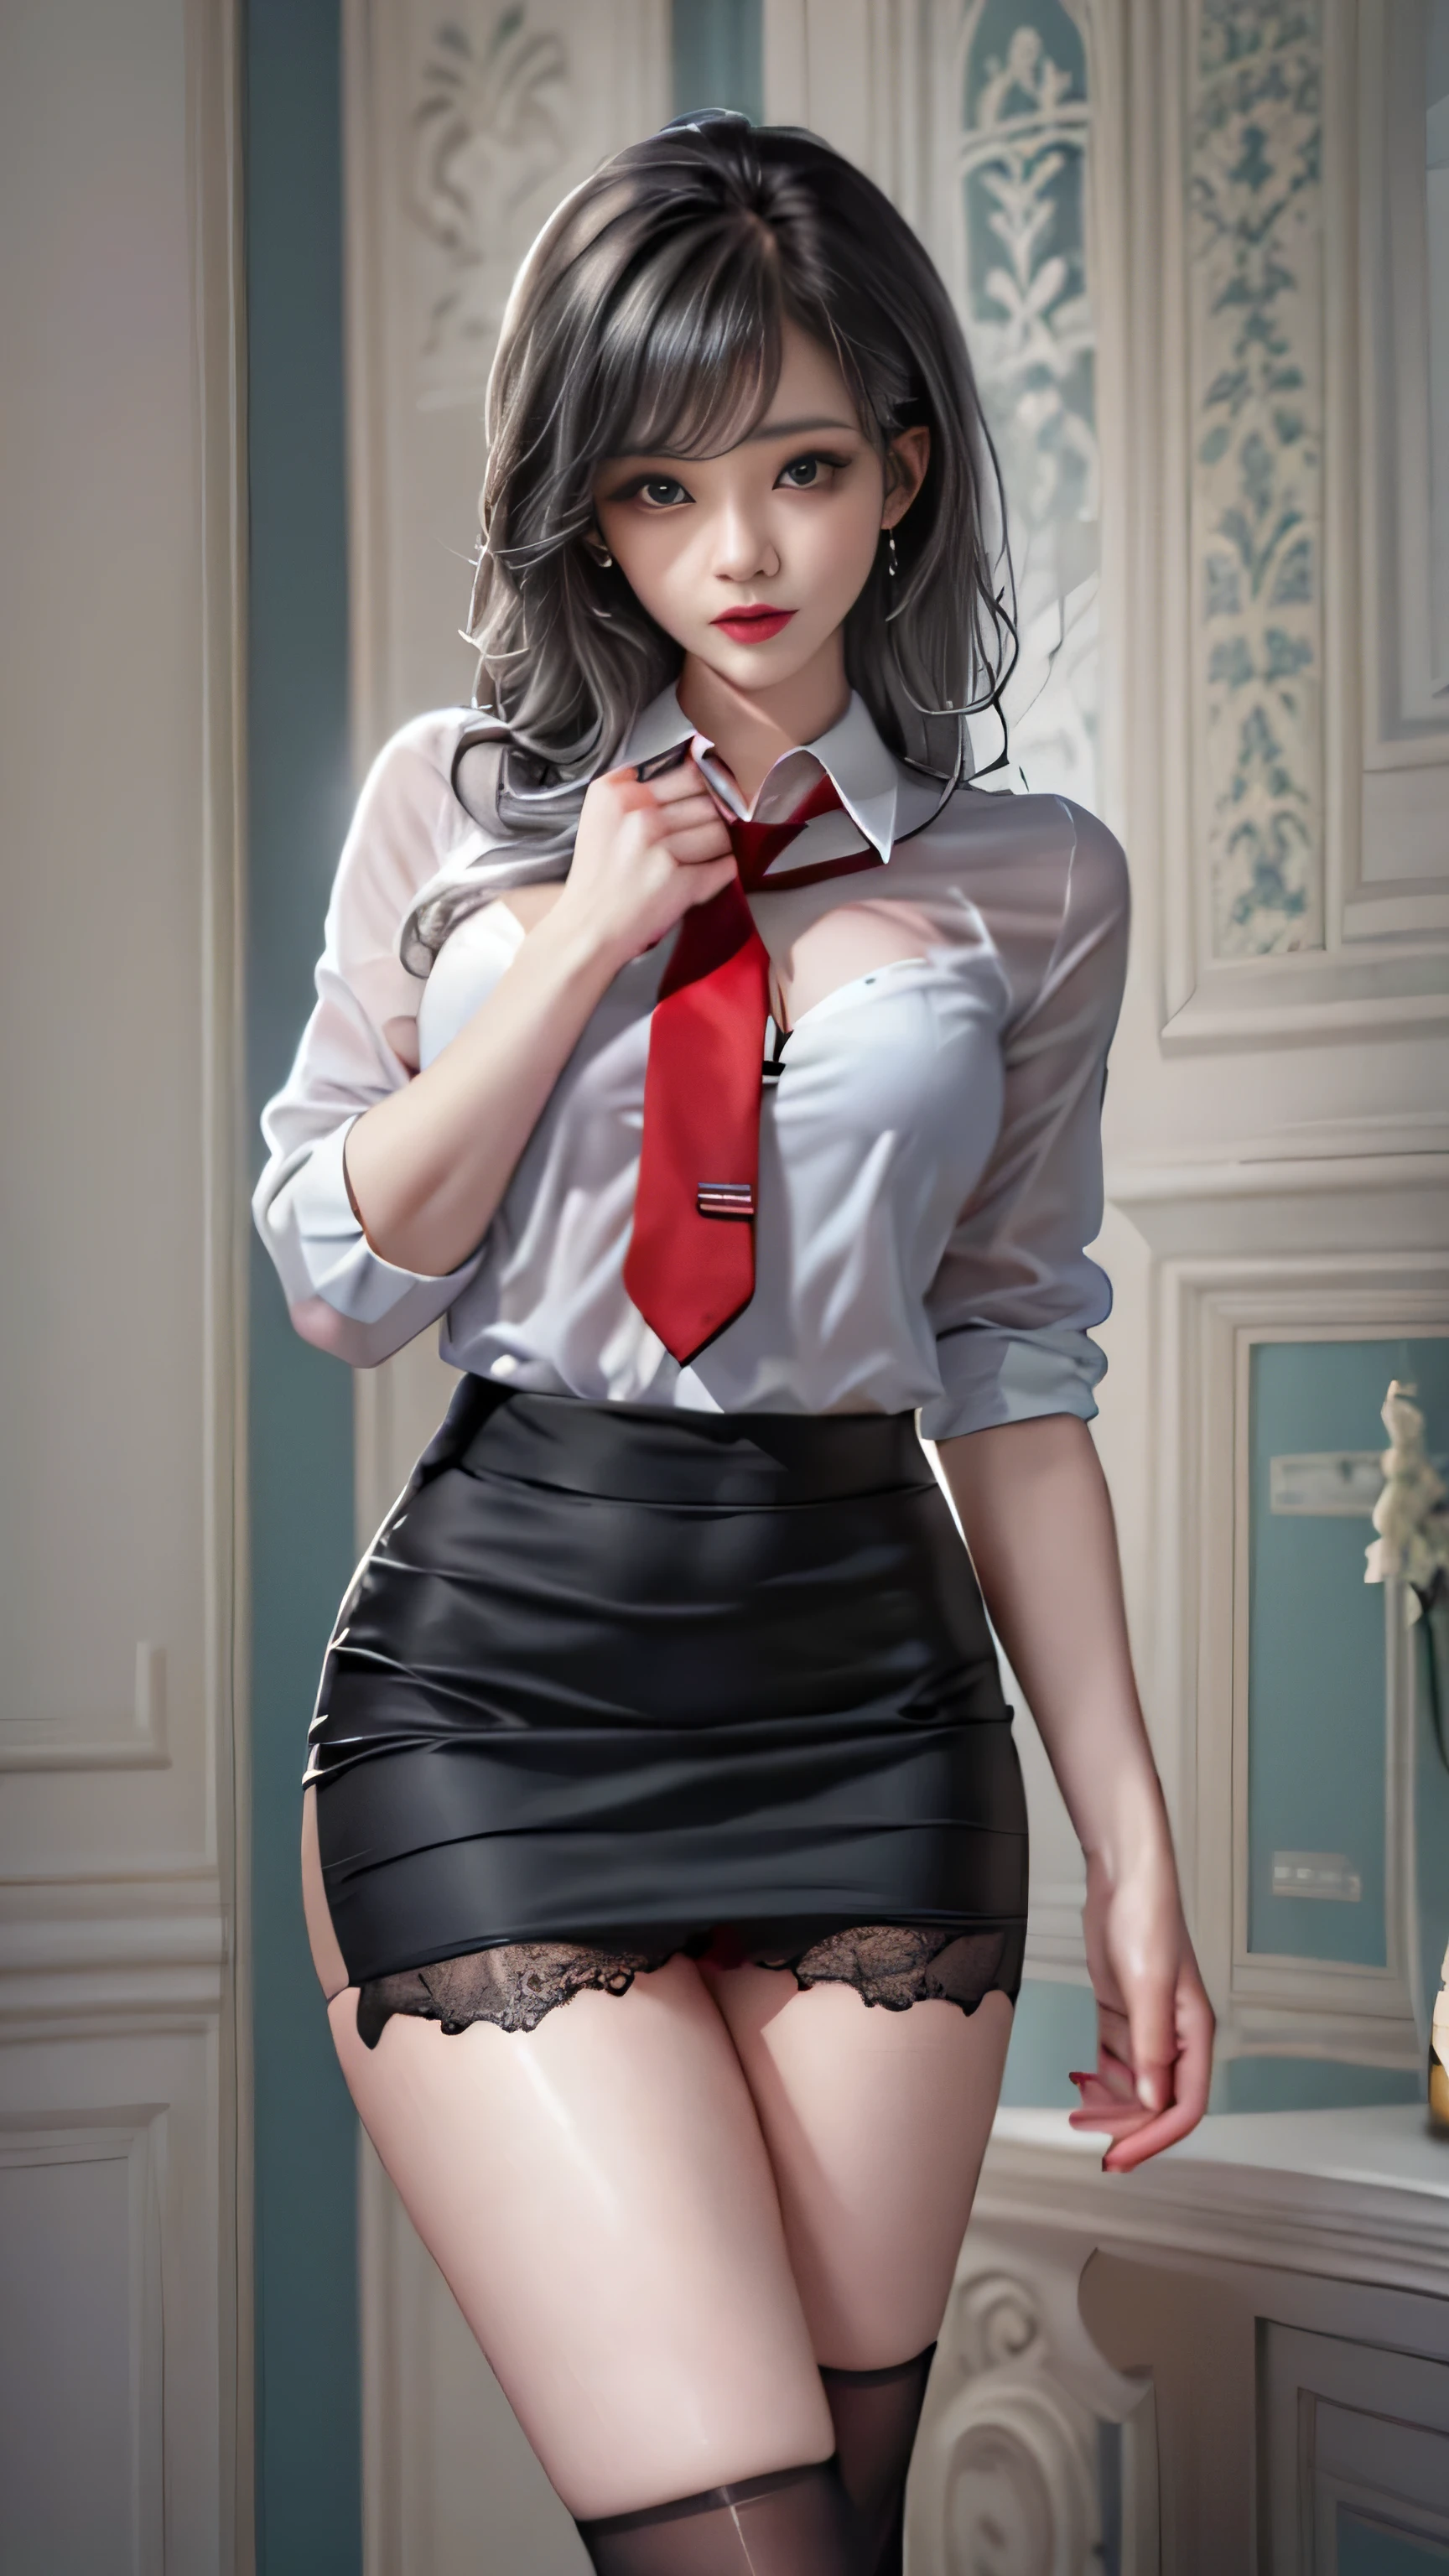 girl portrait photography, realistic, High resolution, 1 female, alone, Upper body, beautiful eyes, Close your lips, detailed face, gray hair, long hair, collared shirt, red tie,black skirt, pencil skirt,, stockings,(Black lace panties are visible)